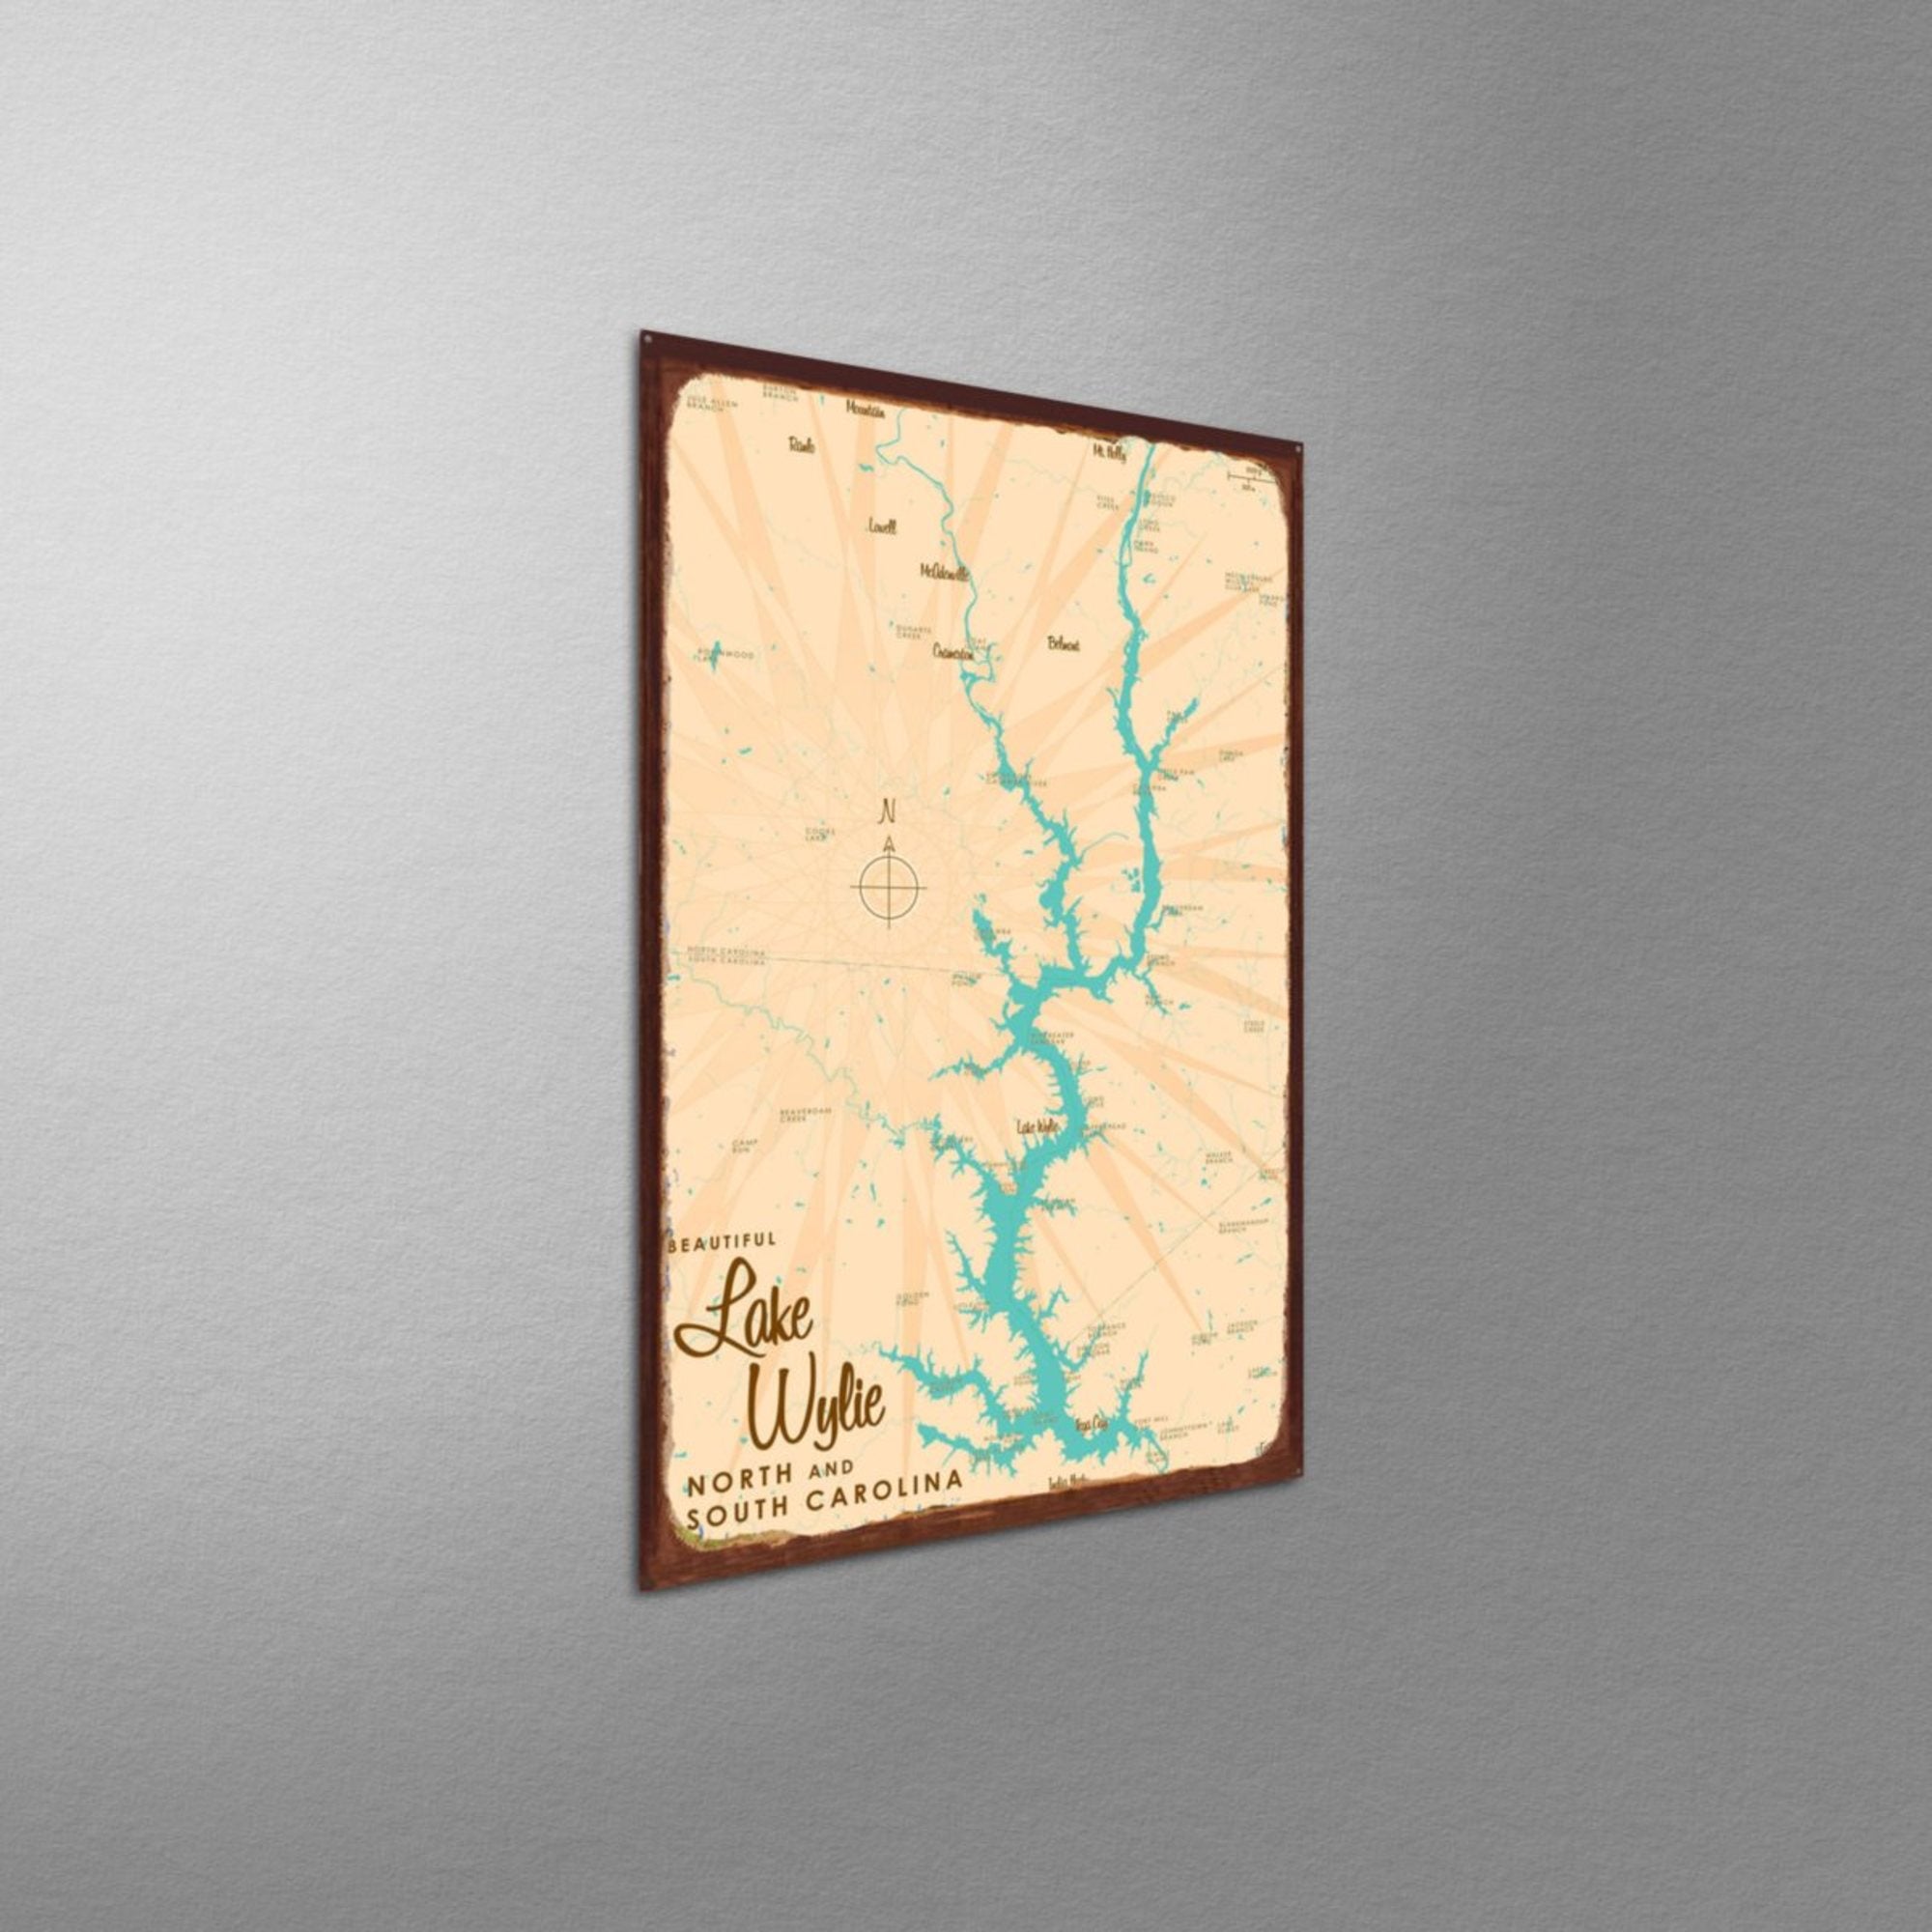 Lake Wylie North and South Carolina, Rustic Metal Sign Map Art